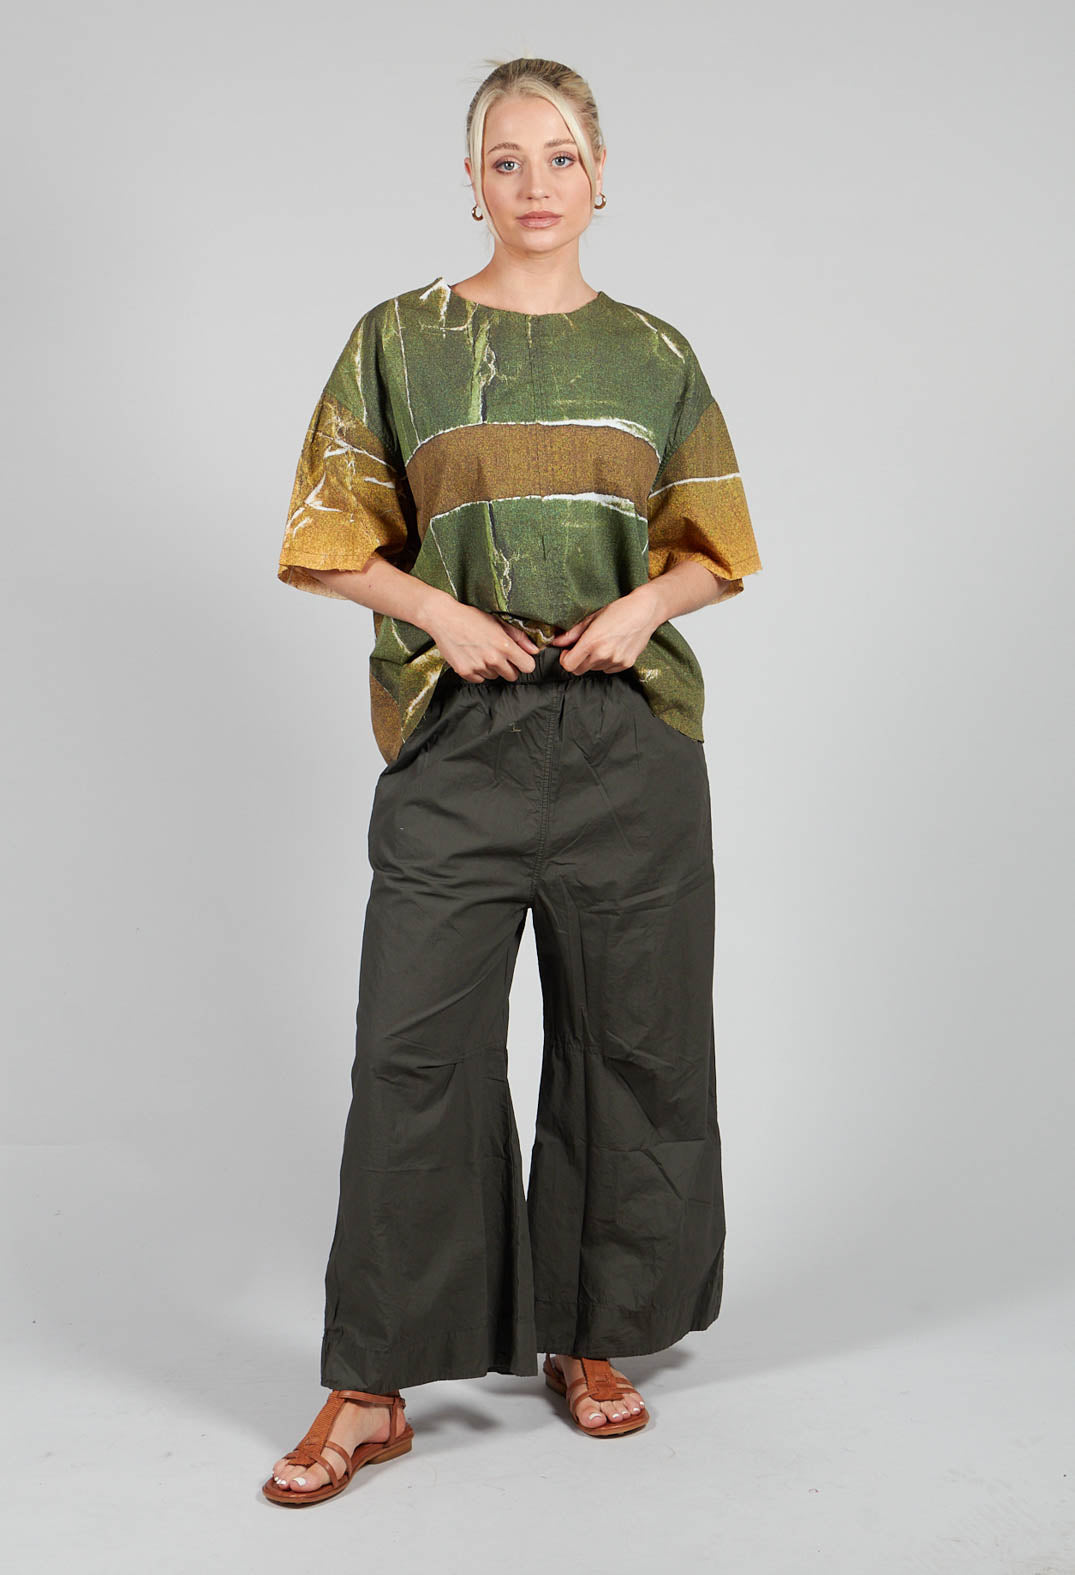 Mismo Trousers in Tea Leaf